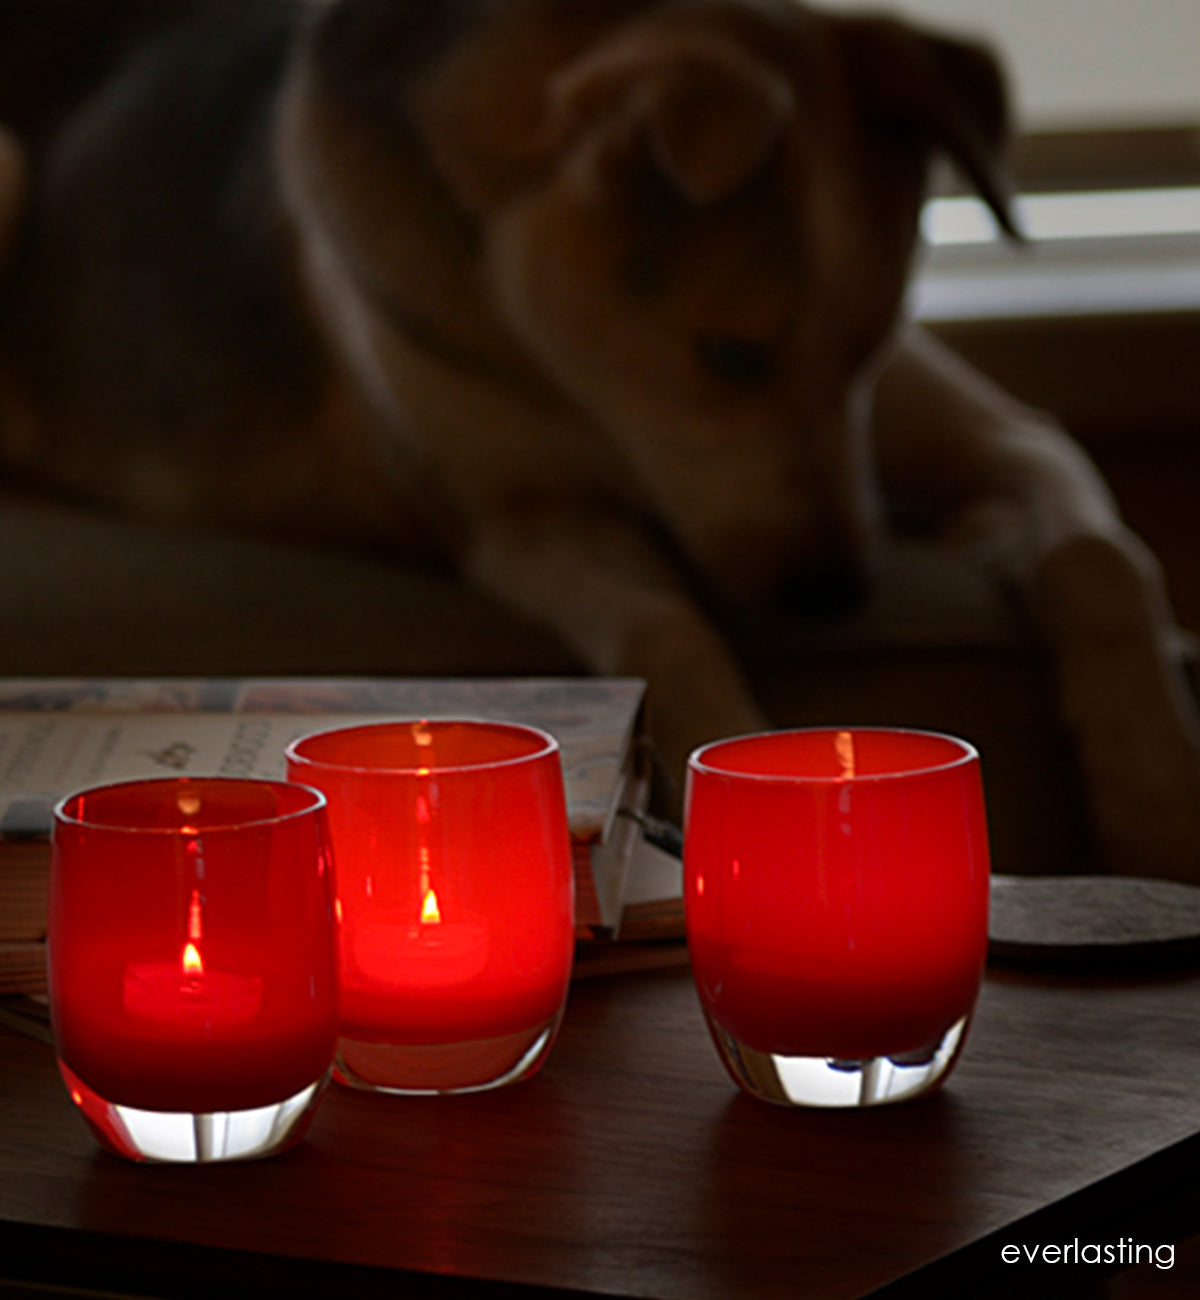 3 everlasting handblown glass candle holders grouped on a table with a dog in the background.